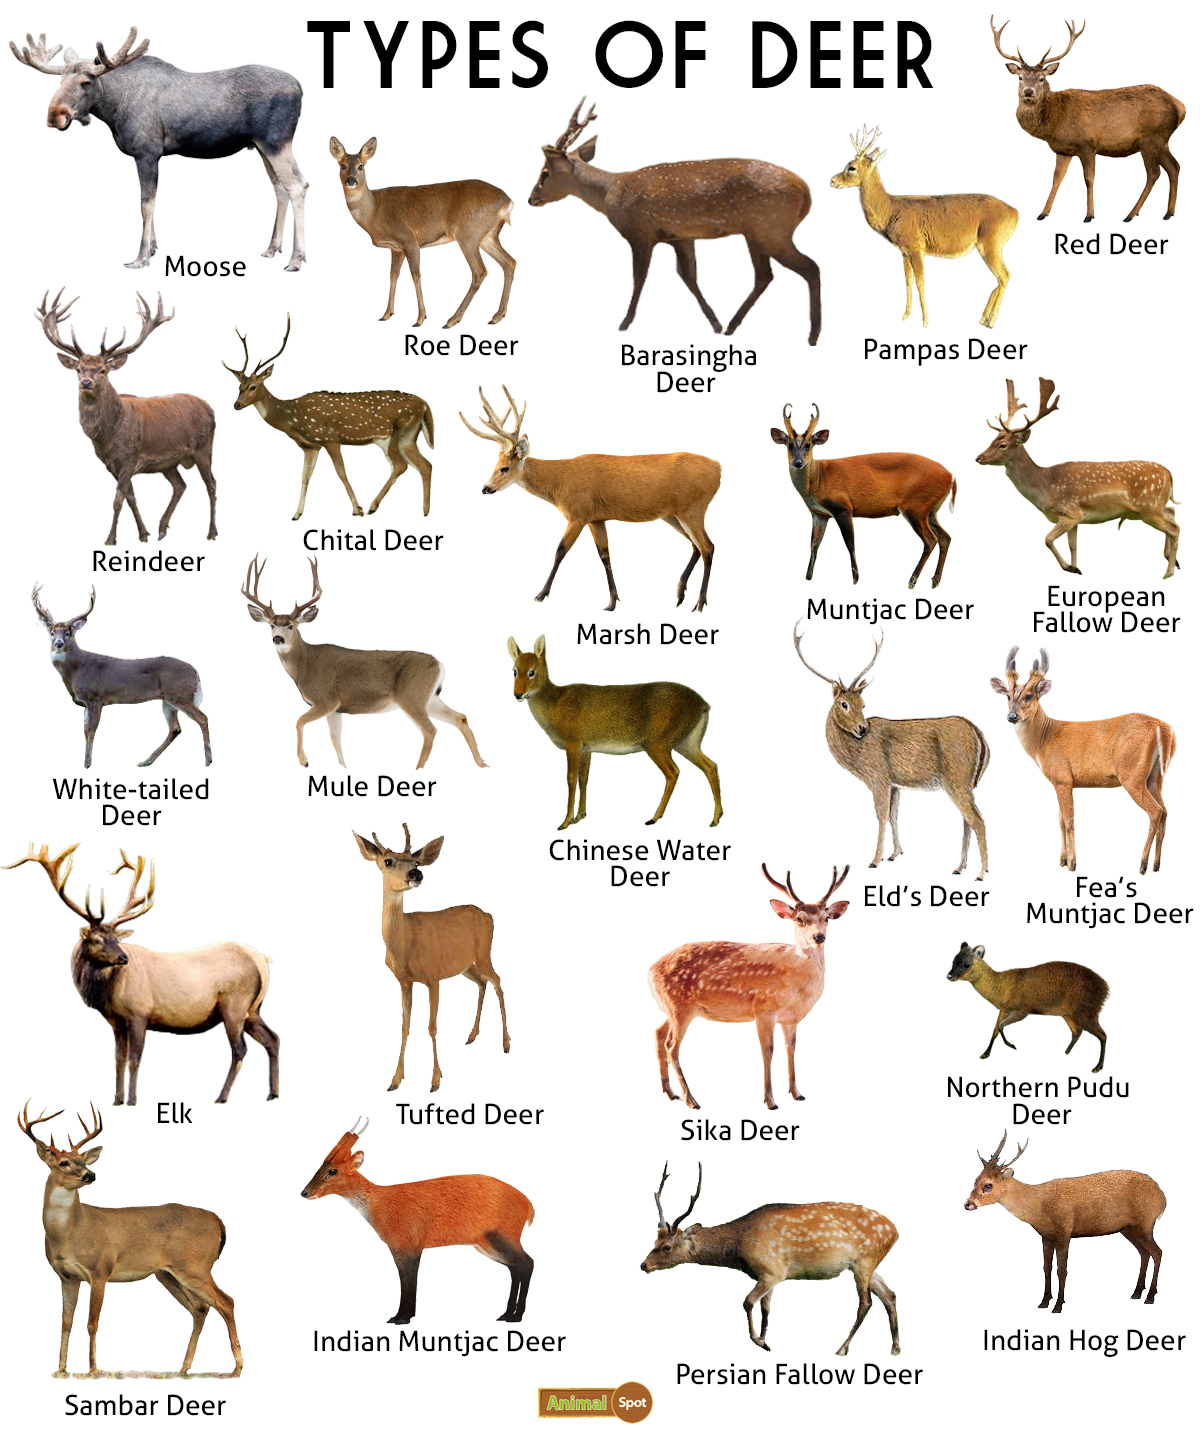 Deer Facts, Types, Diet, Reproduction, Classification, Pictures